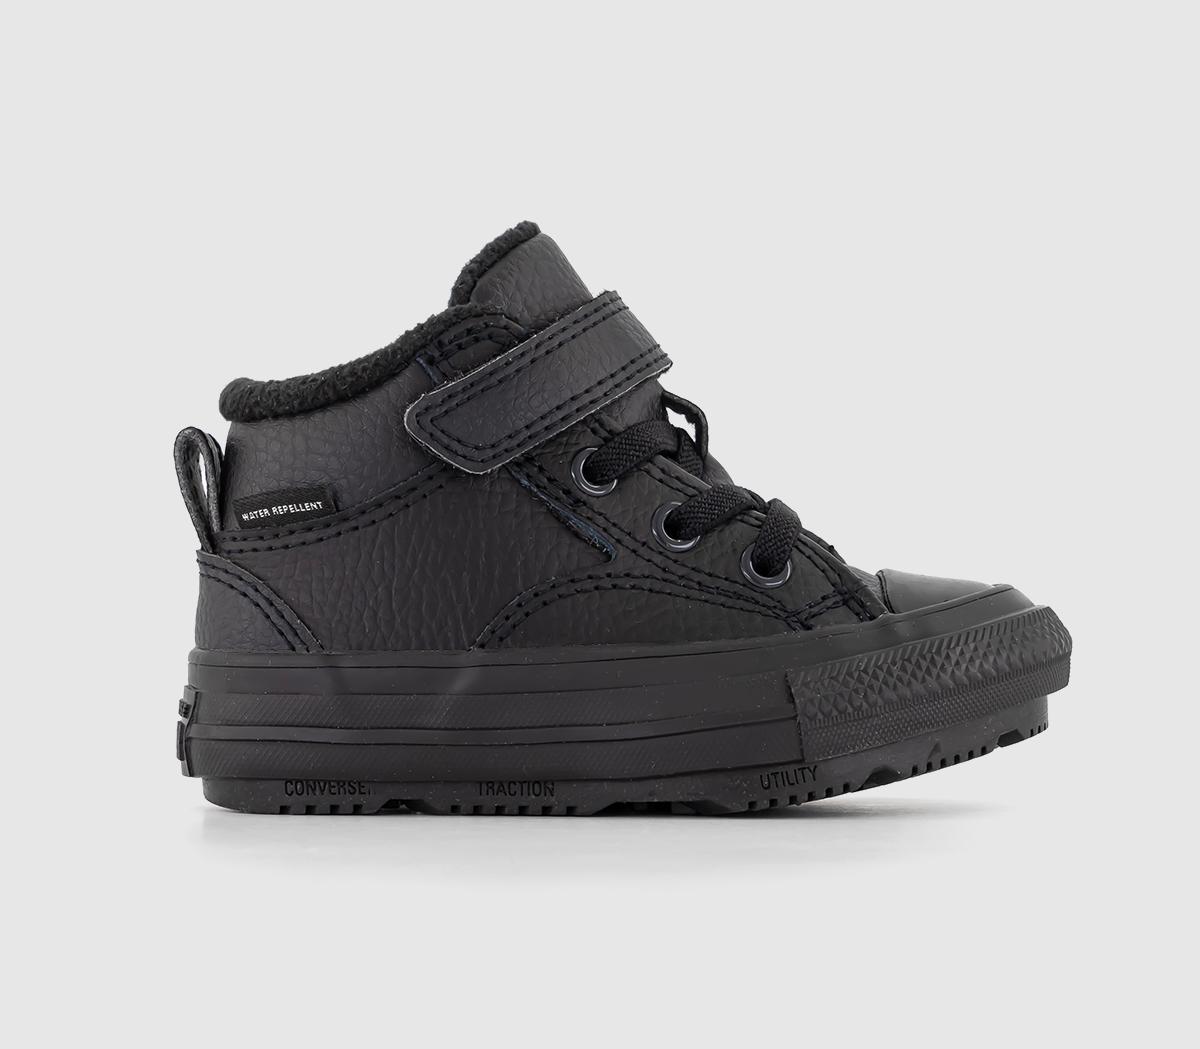 ConverseAll Star Hi 1vlace Infant Trainers Black